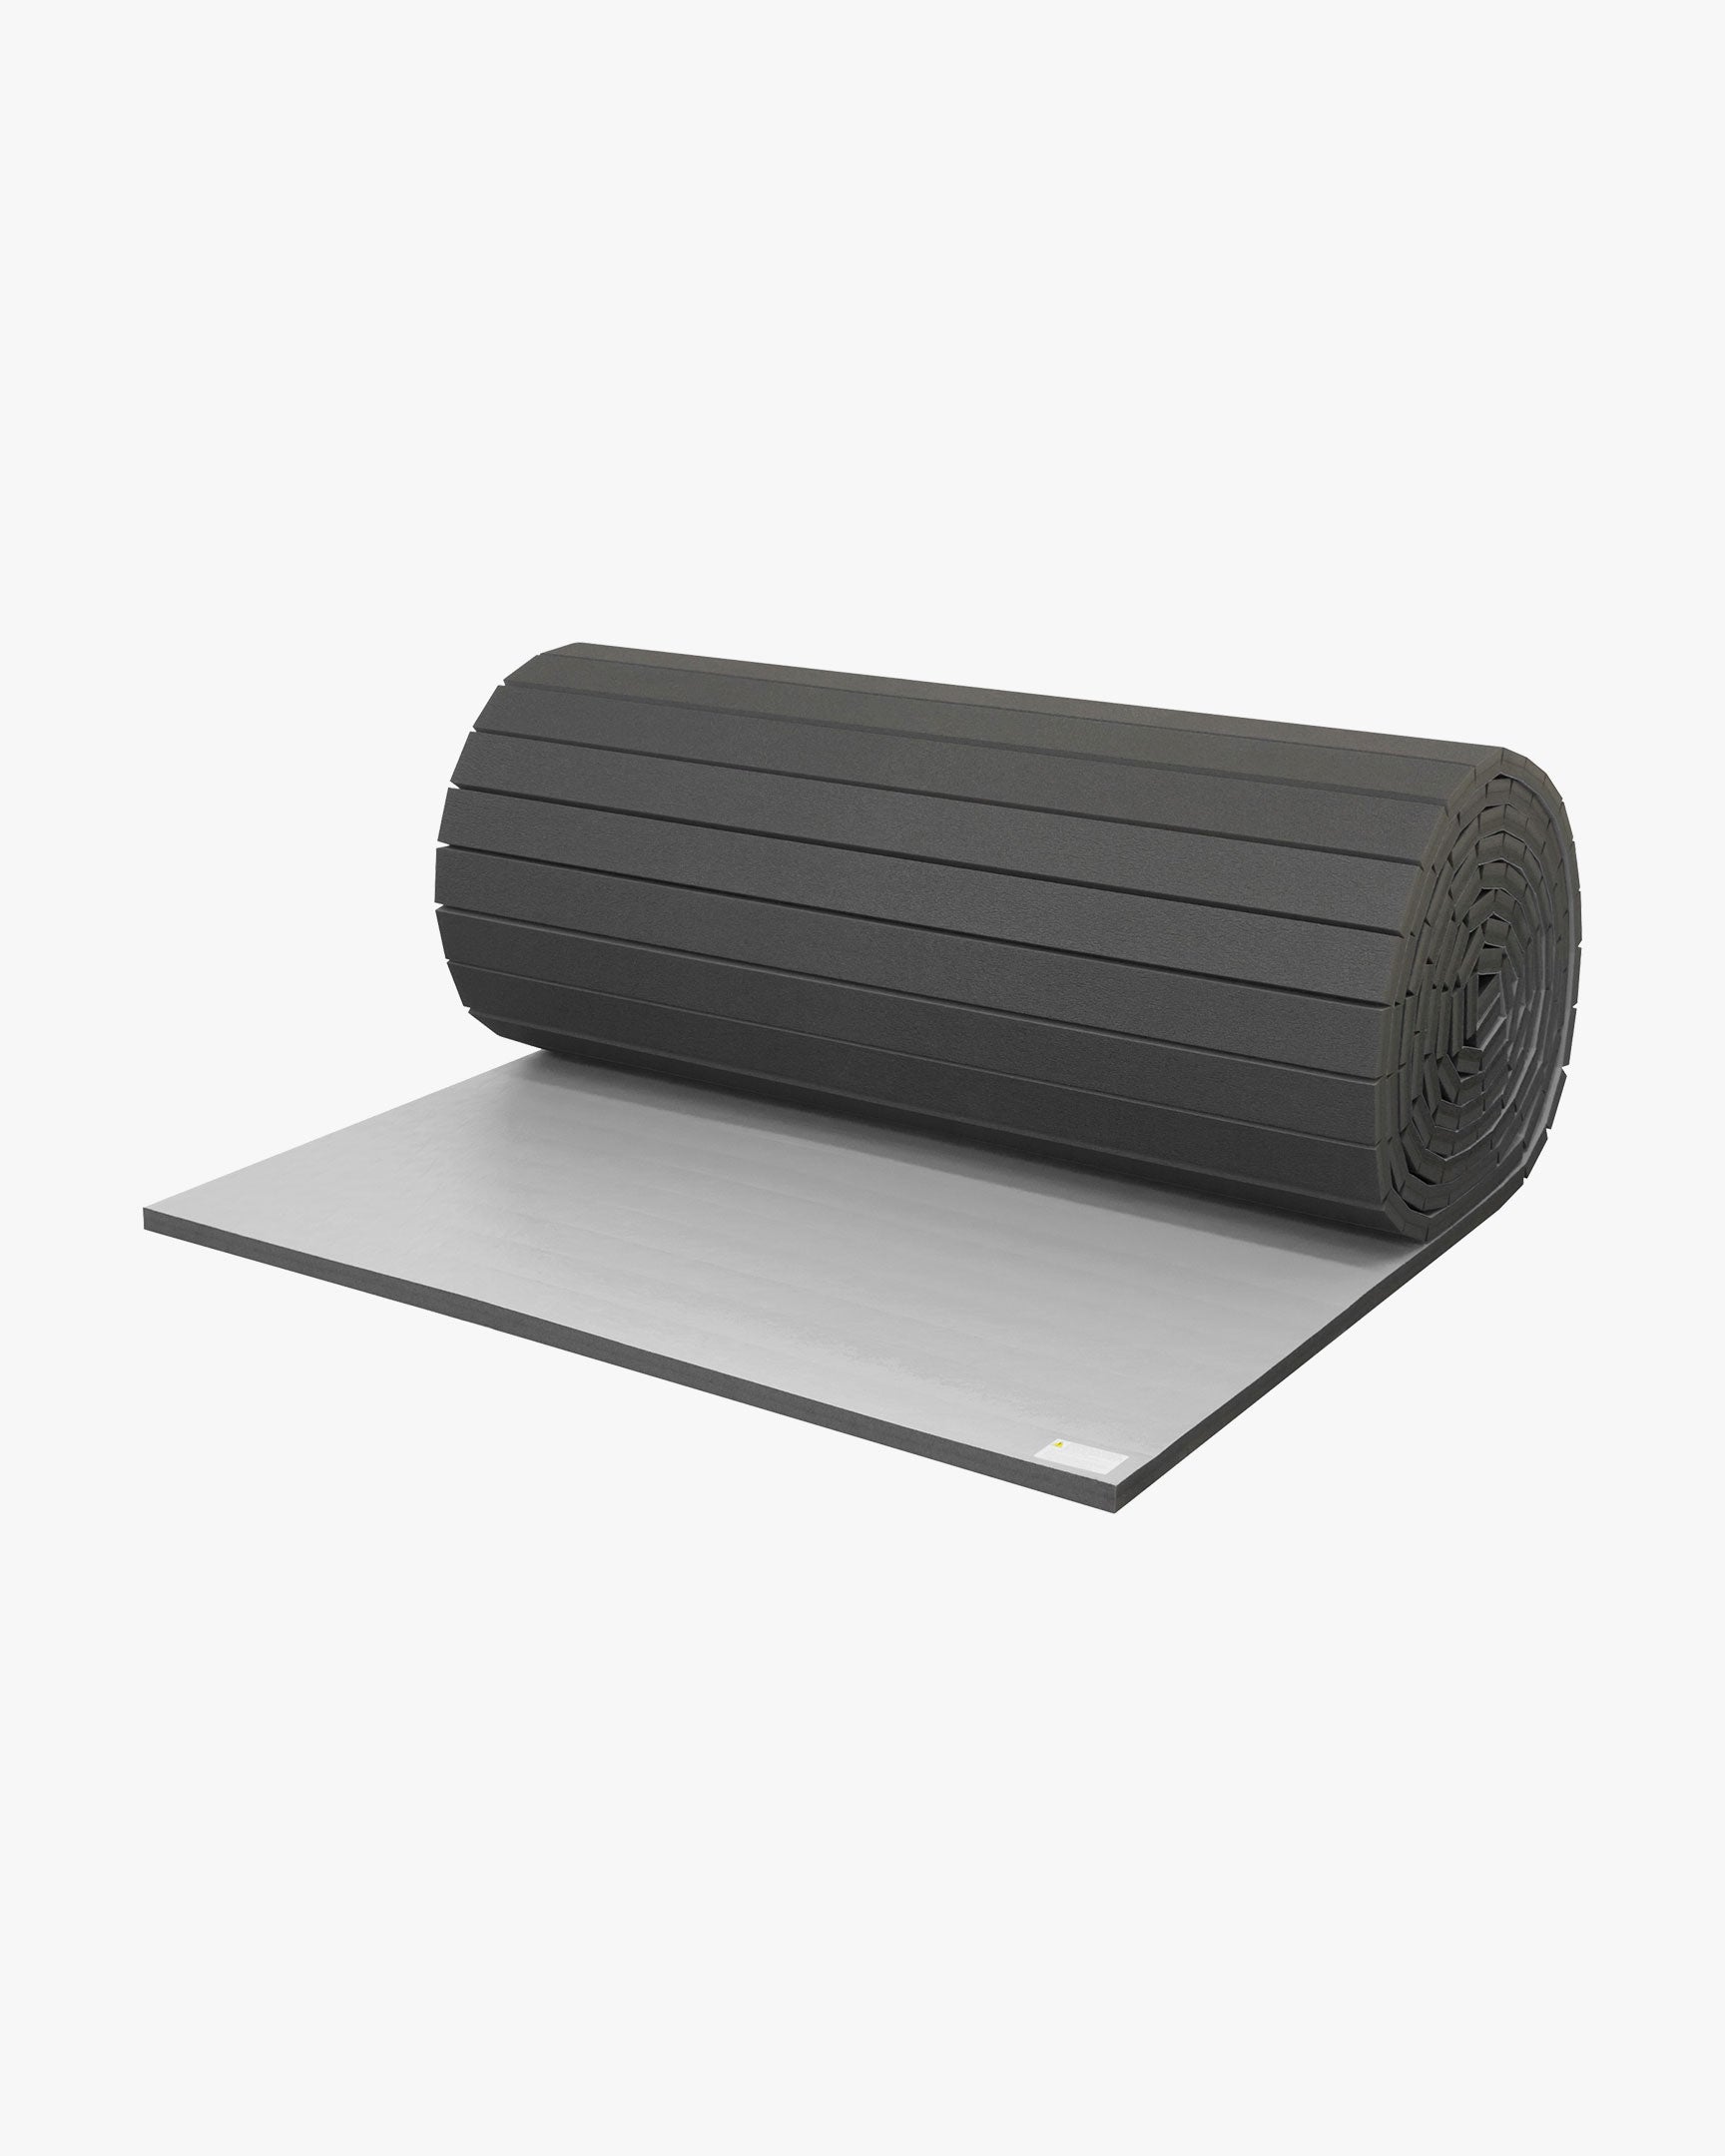 Home Tatami Rollout Mat - 5' x 10' x 1.25 Thick